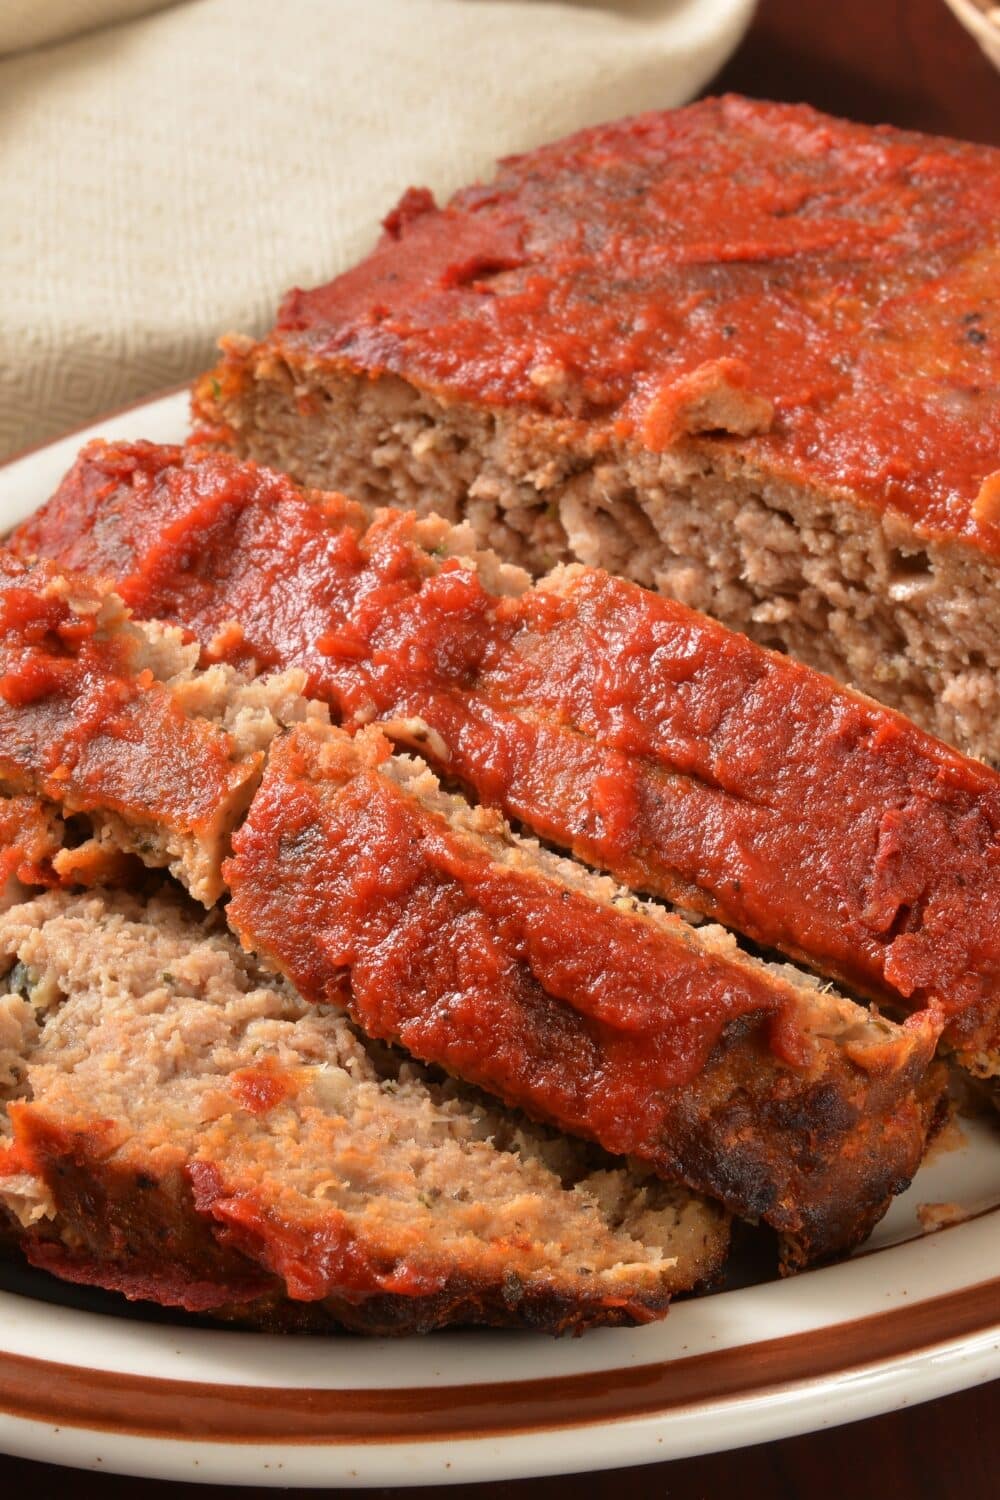 Savory keto meatloaf, expertly seasoned and baked to perfection, crowned with a glaze of sugar-free ketchup. The meatloaf boasts a flavorful blend of premium meats and low-carb binders, creating a moist and delectable texture. The glossy ketchup topping adds a tangy, slightly sweet contrast, making each slice a delightful, guilt-free indulgence.